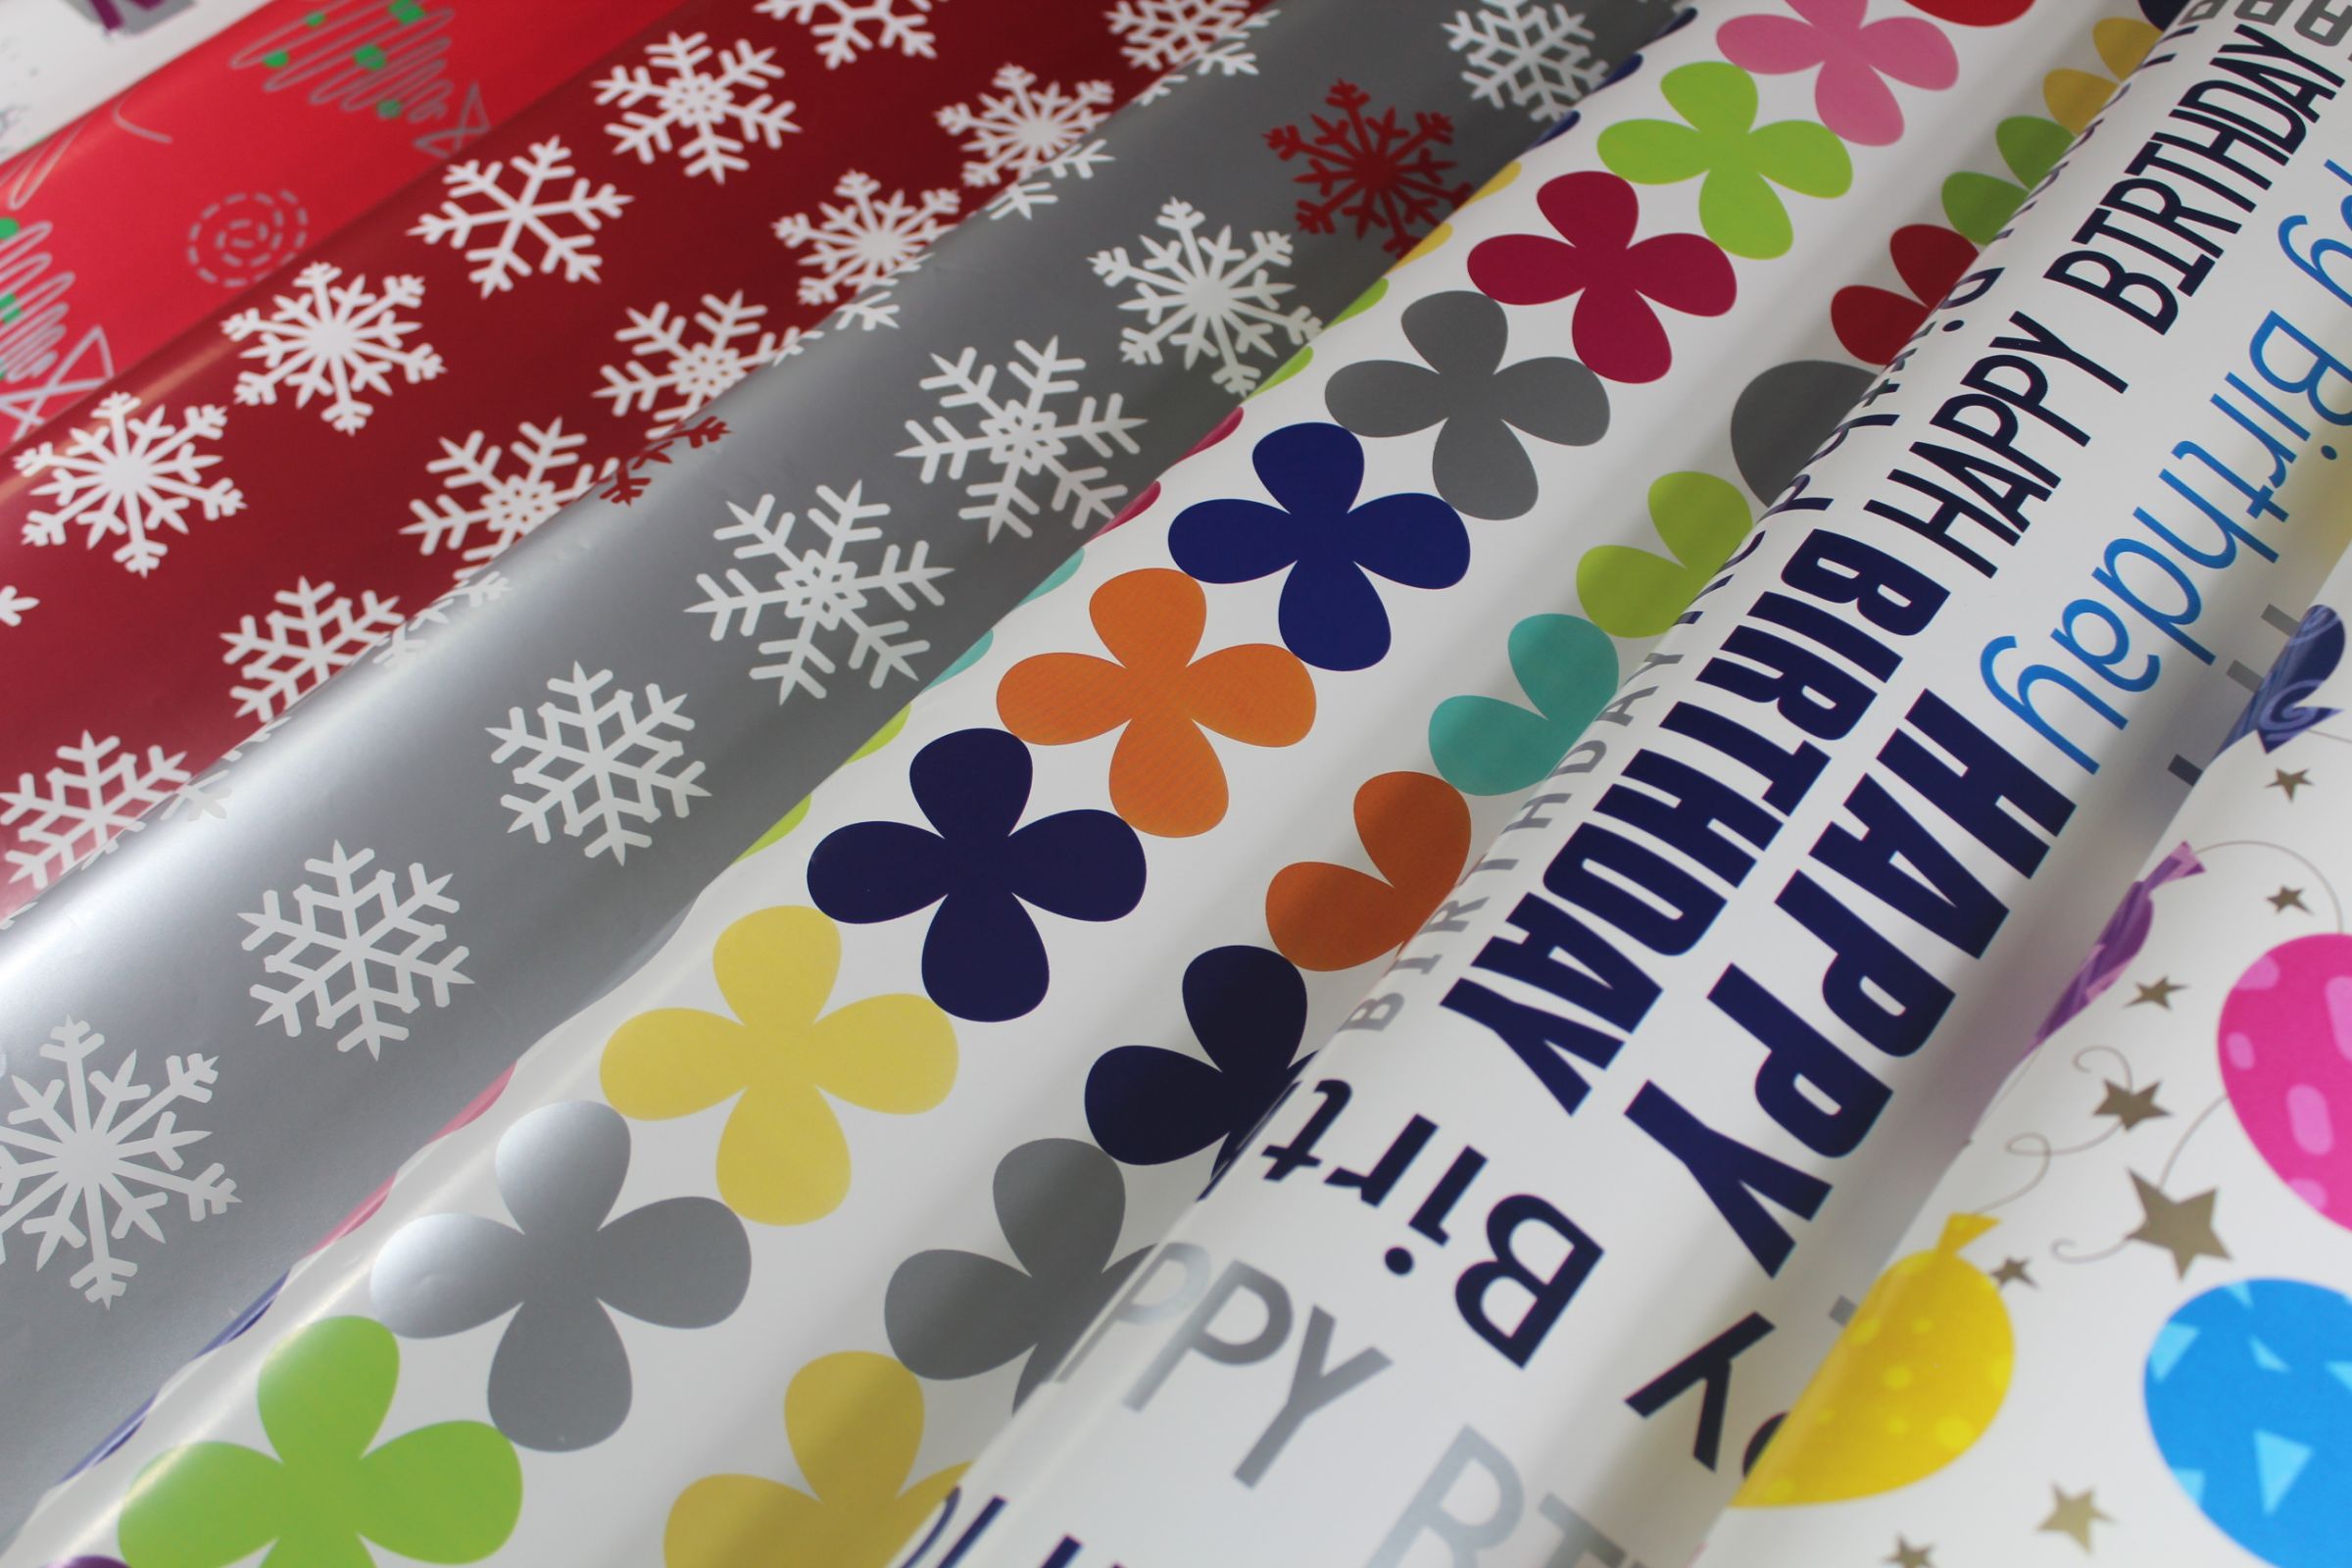 Premium custom gift wrapping paper for everyday and all occasions presents packaging directly from factory